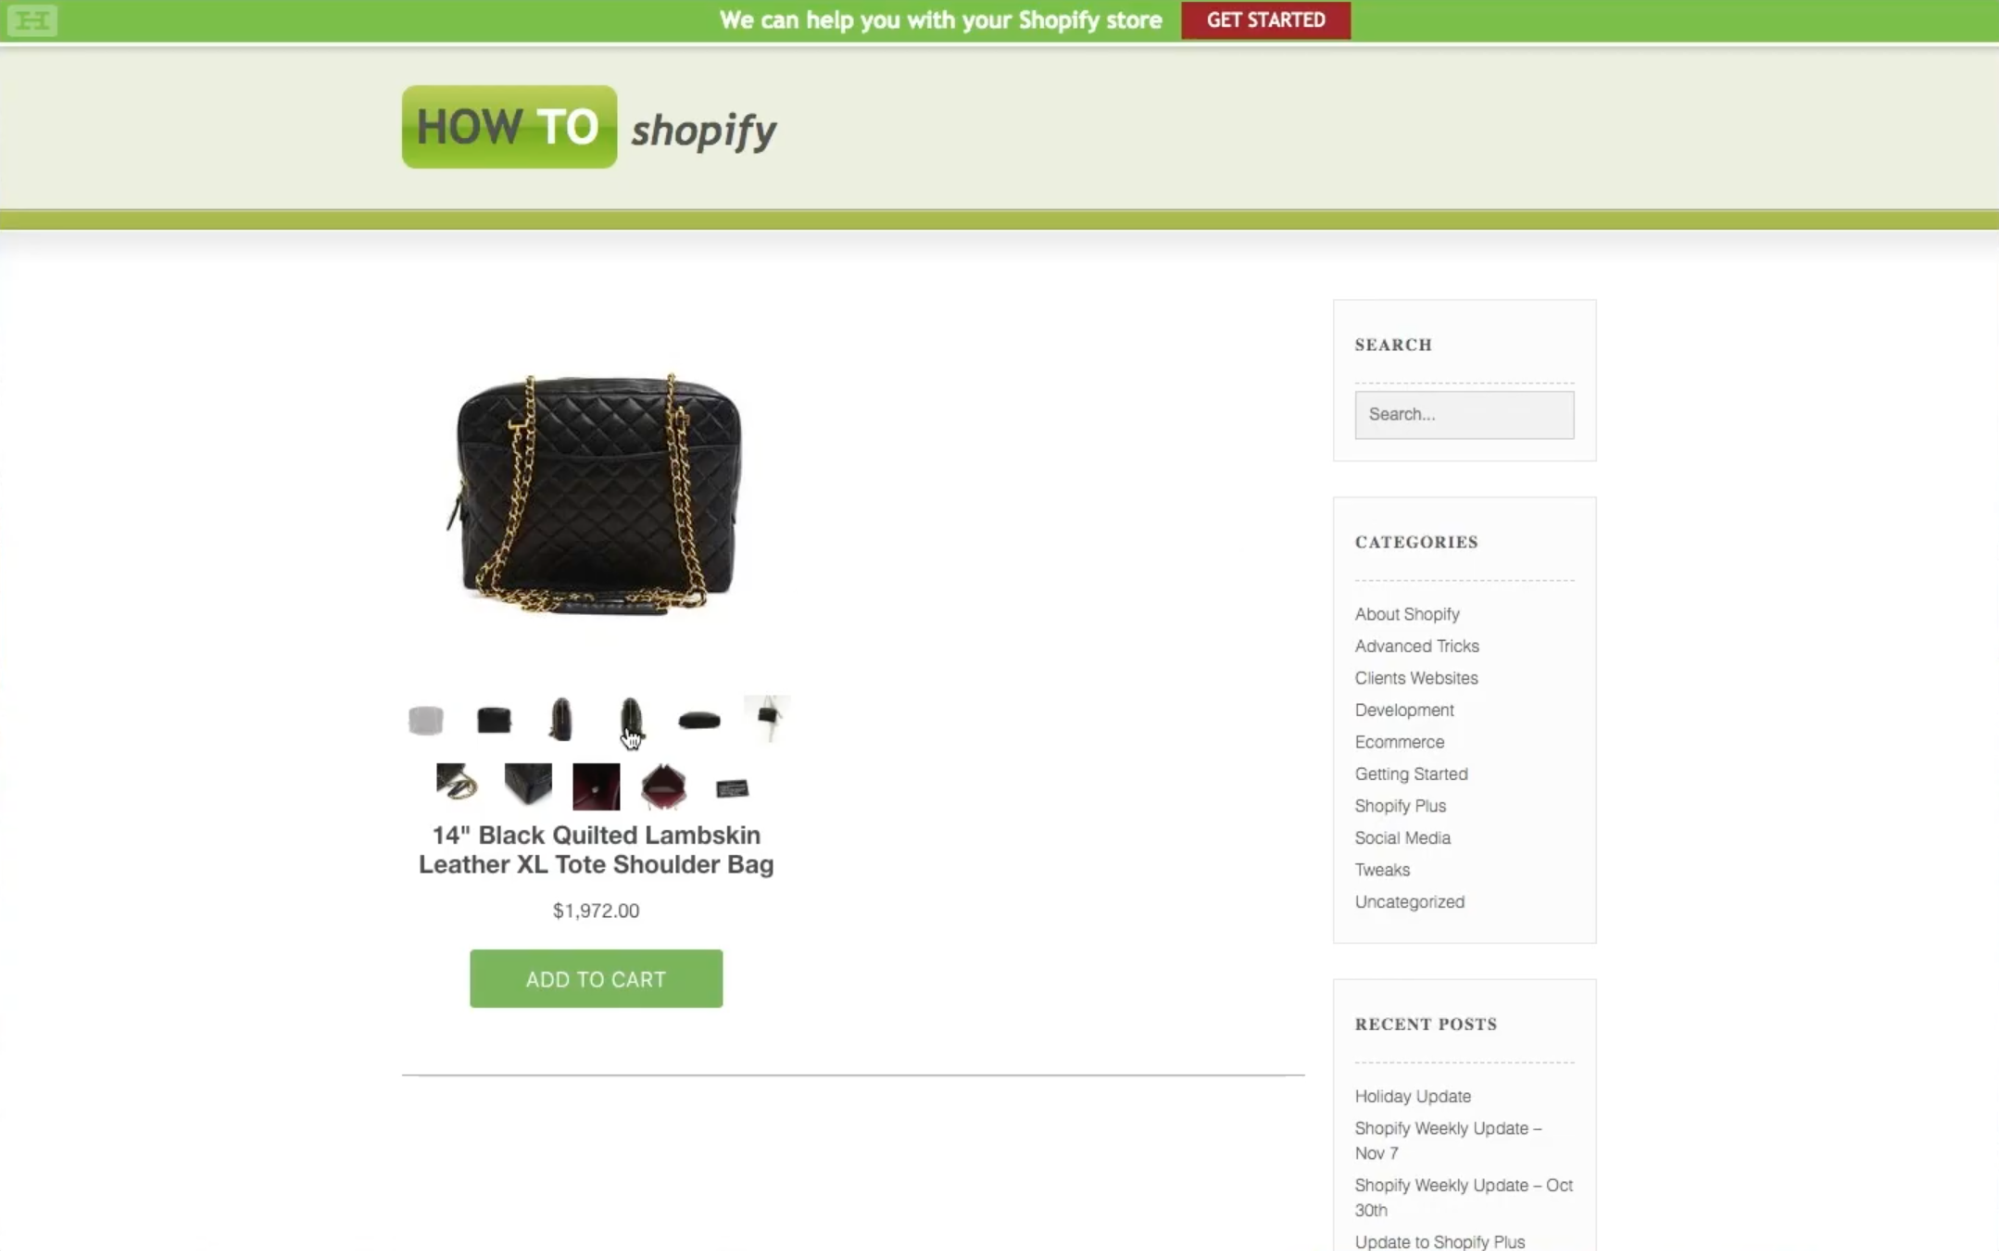 Shopify Buy Button appears to be installed correctly